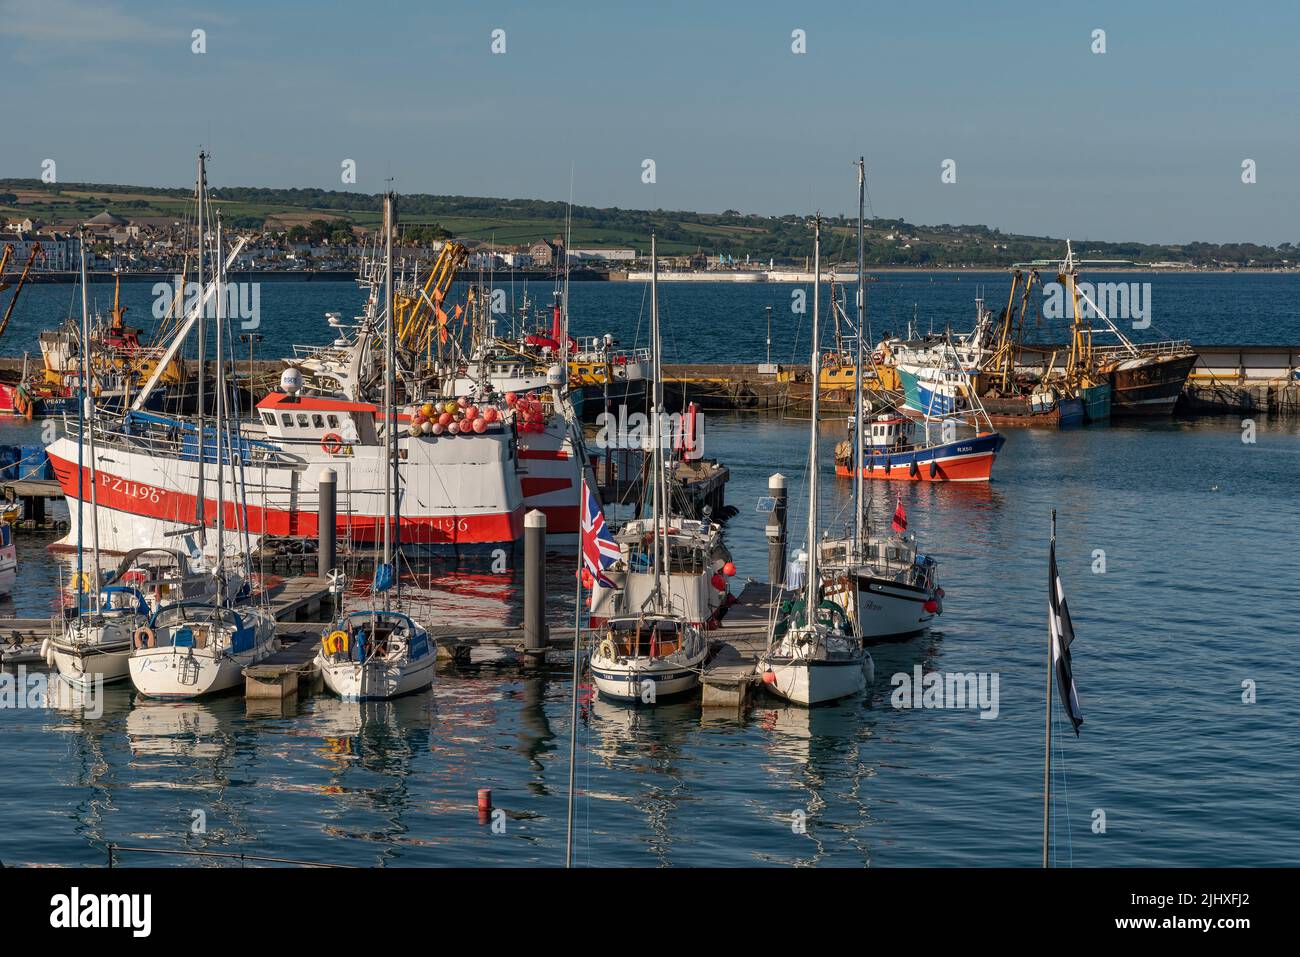 Newlyn Harbour, Penzance, Cornwall, England, UK. 2022. Commercial fishing boats and leisure craft in port at Newlyn Harbour, Stock Photo